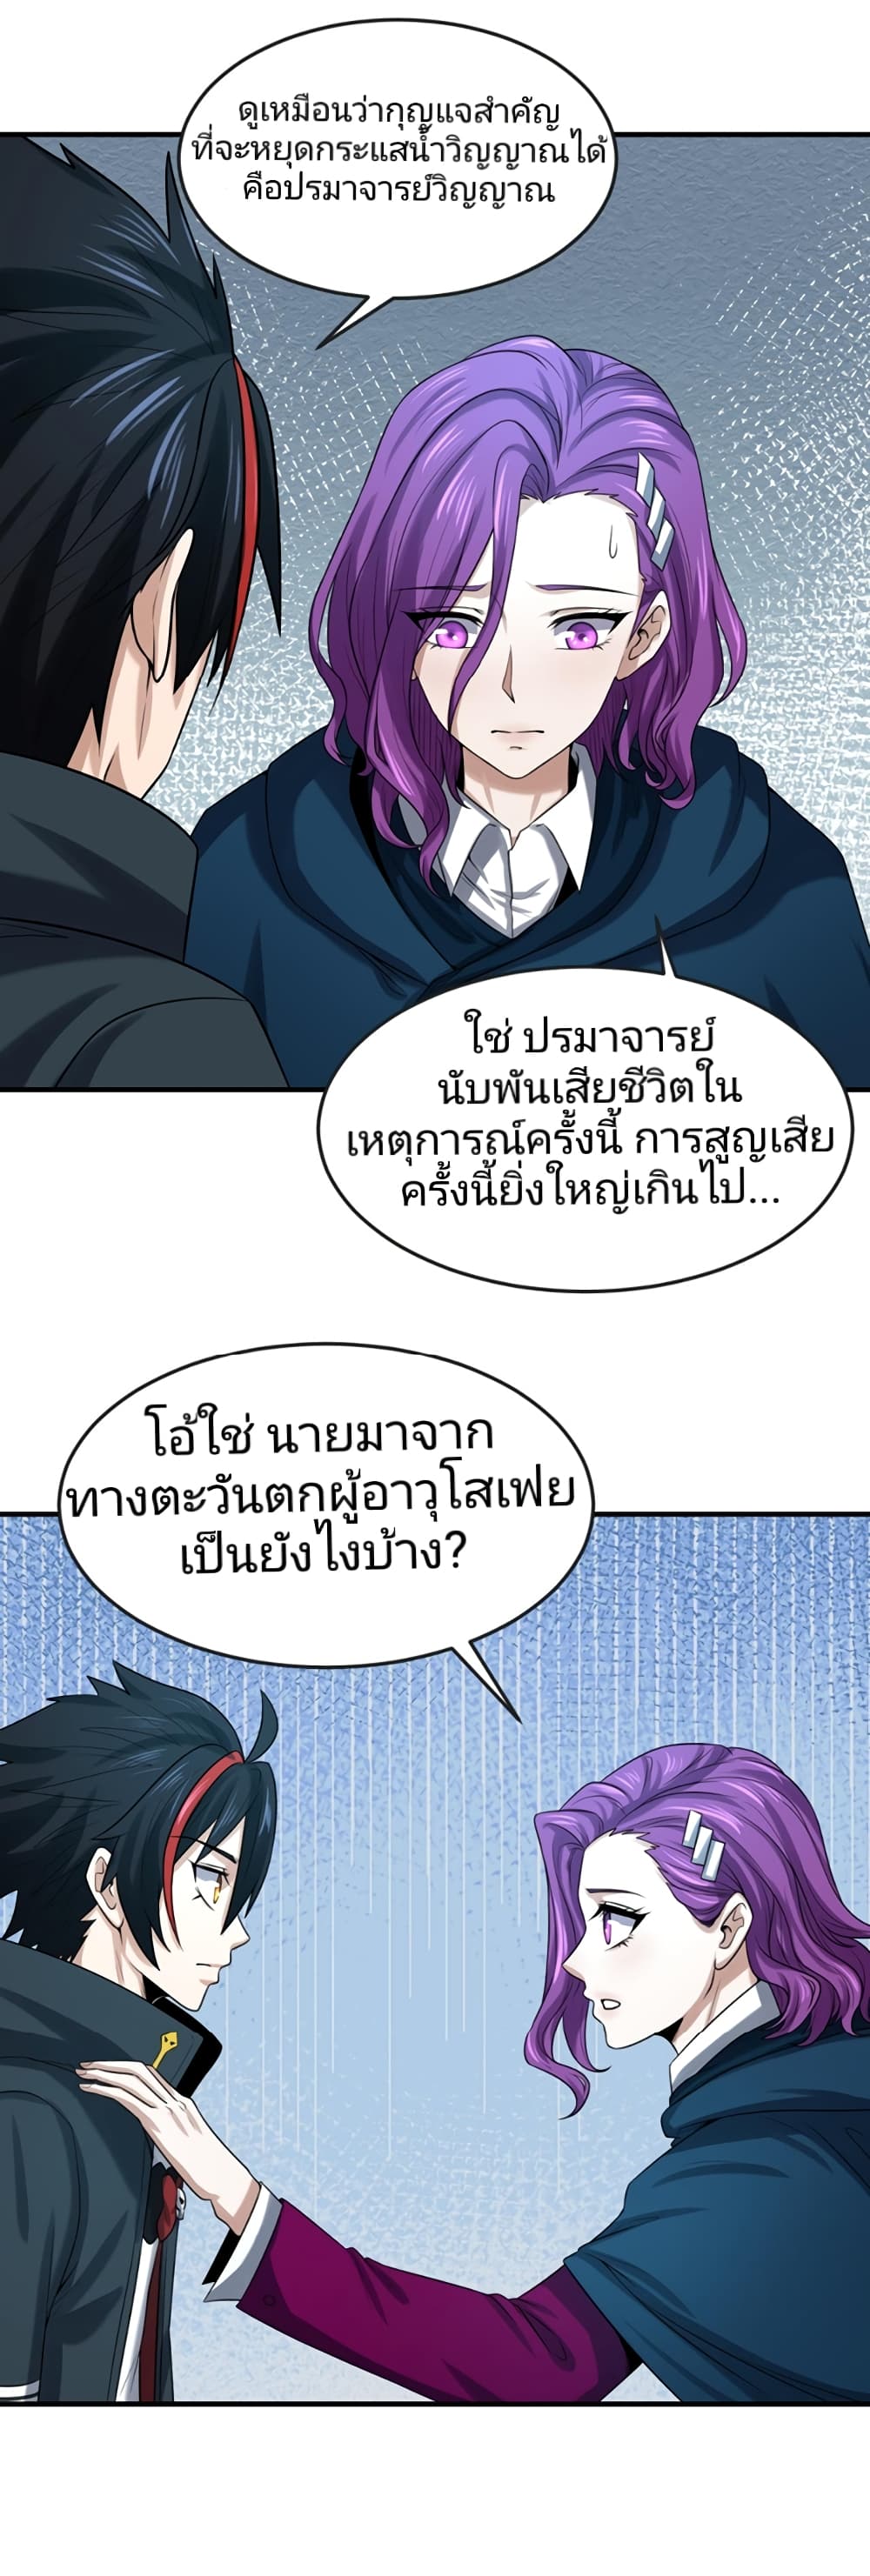 The Age of Ghost Spirits à¸à¸­à¸à¸à¸µà¹ 35 (13)